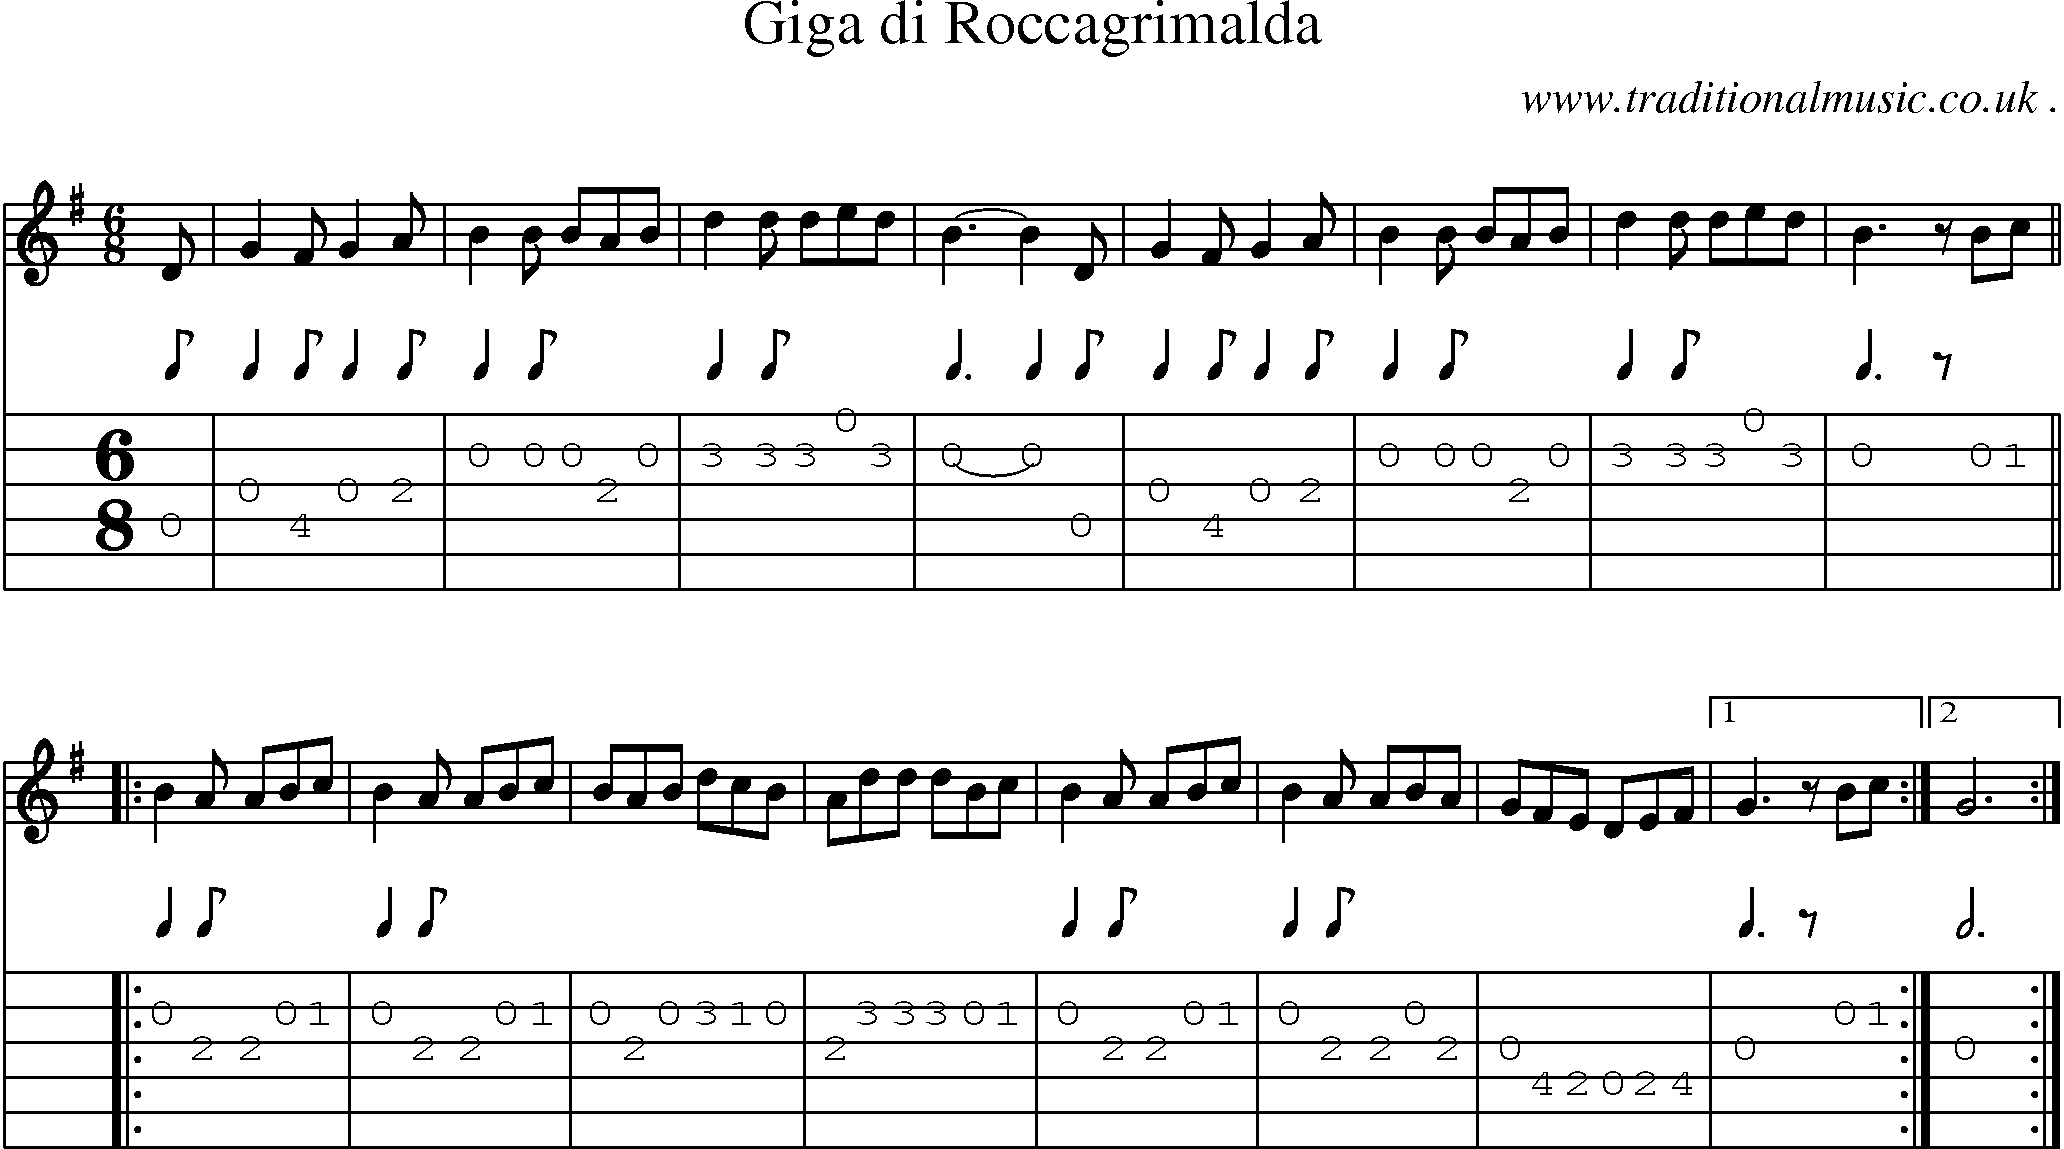 Sheet-Music and Guitar Tabs for Giga Di Roccagrimalda